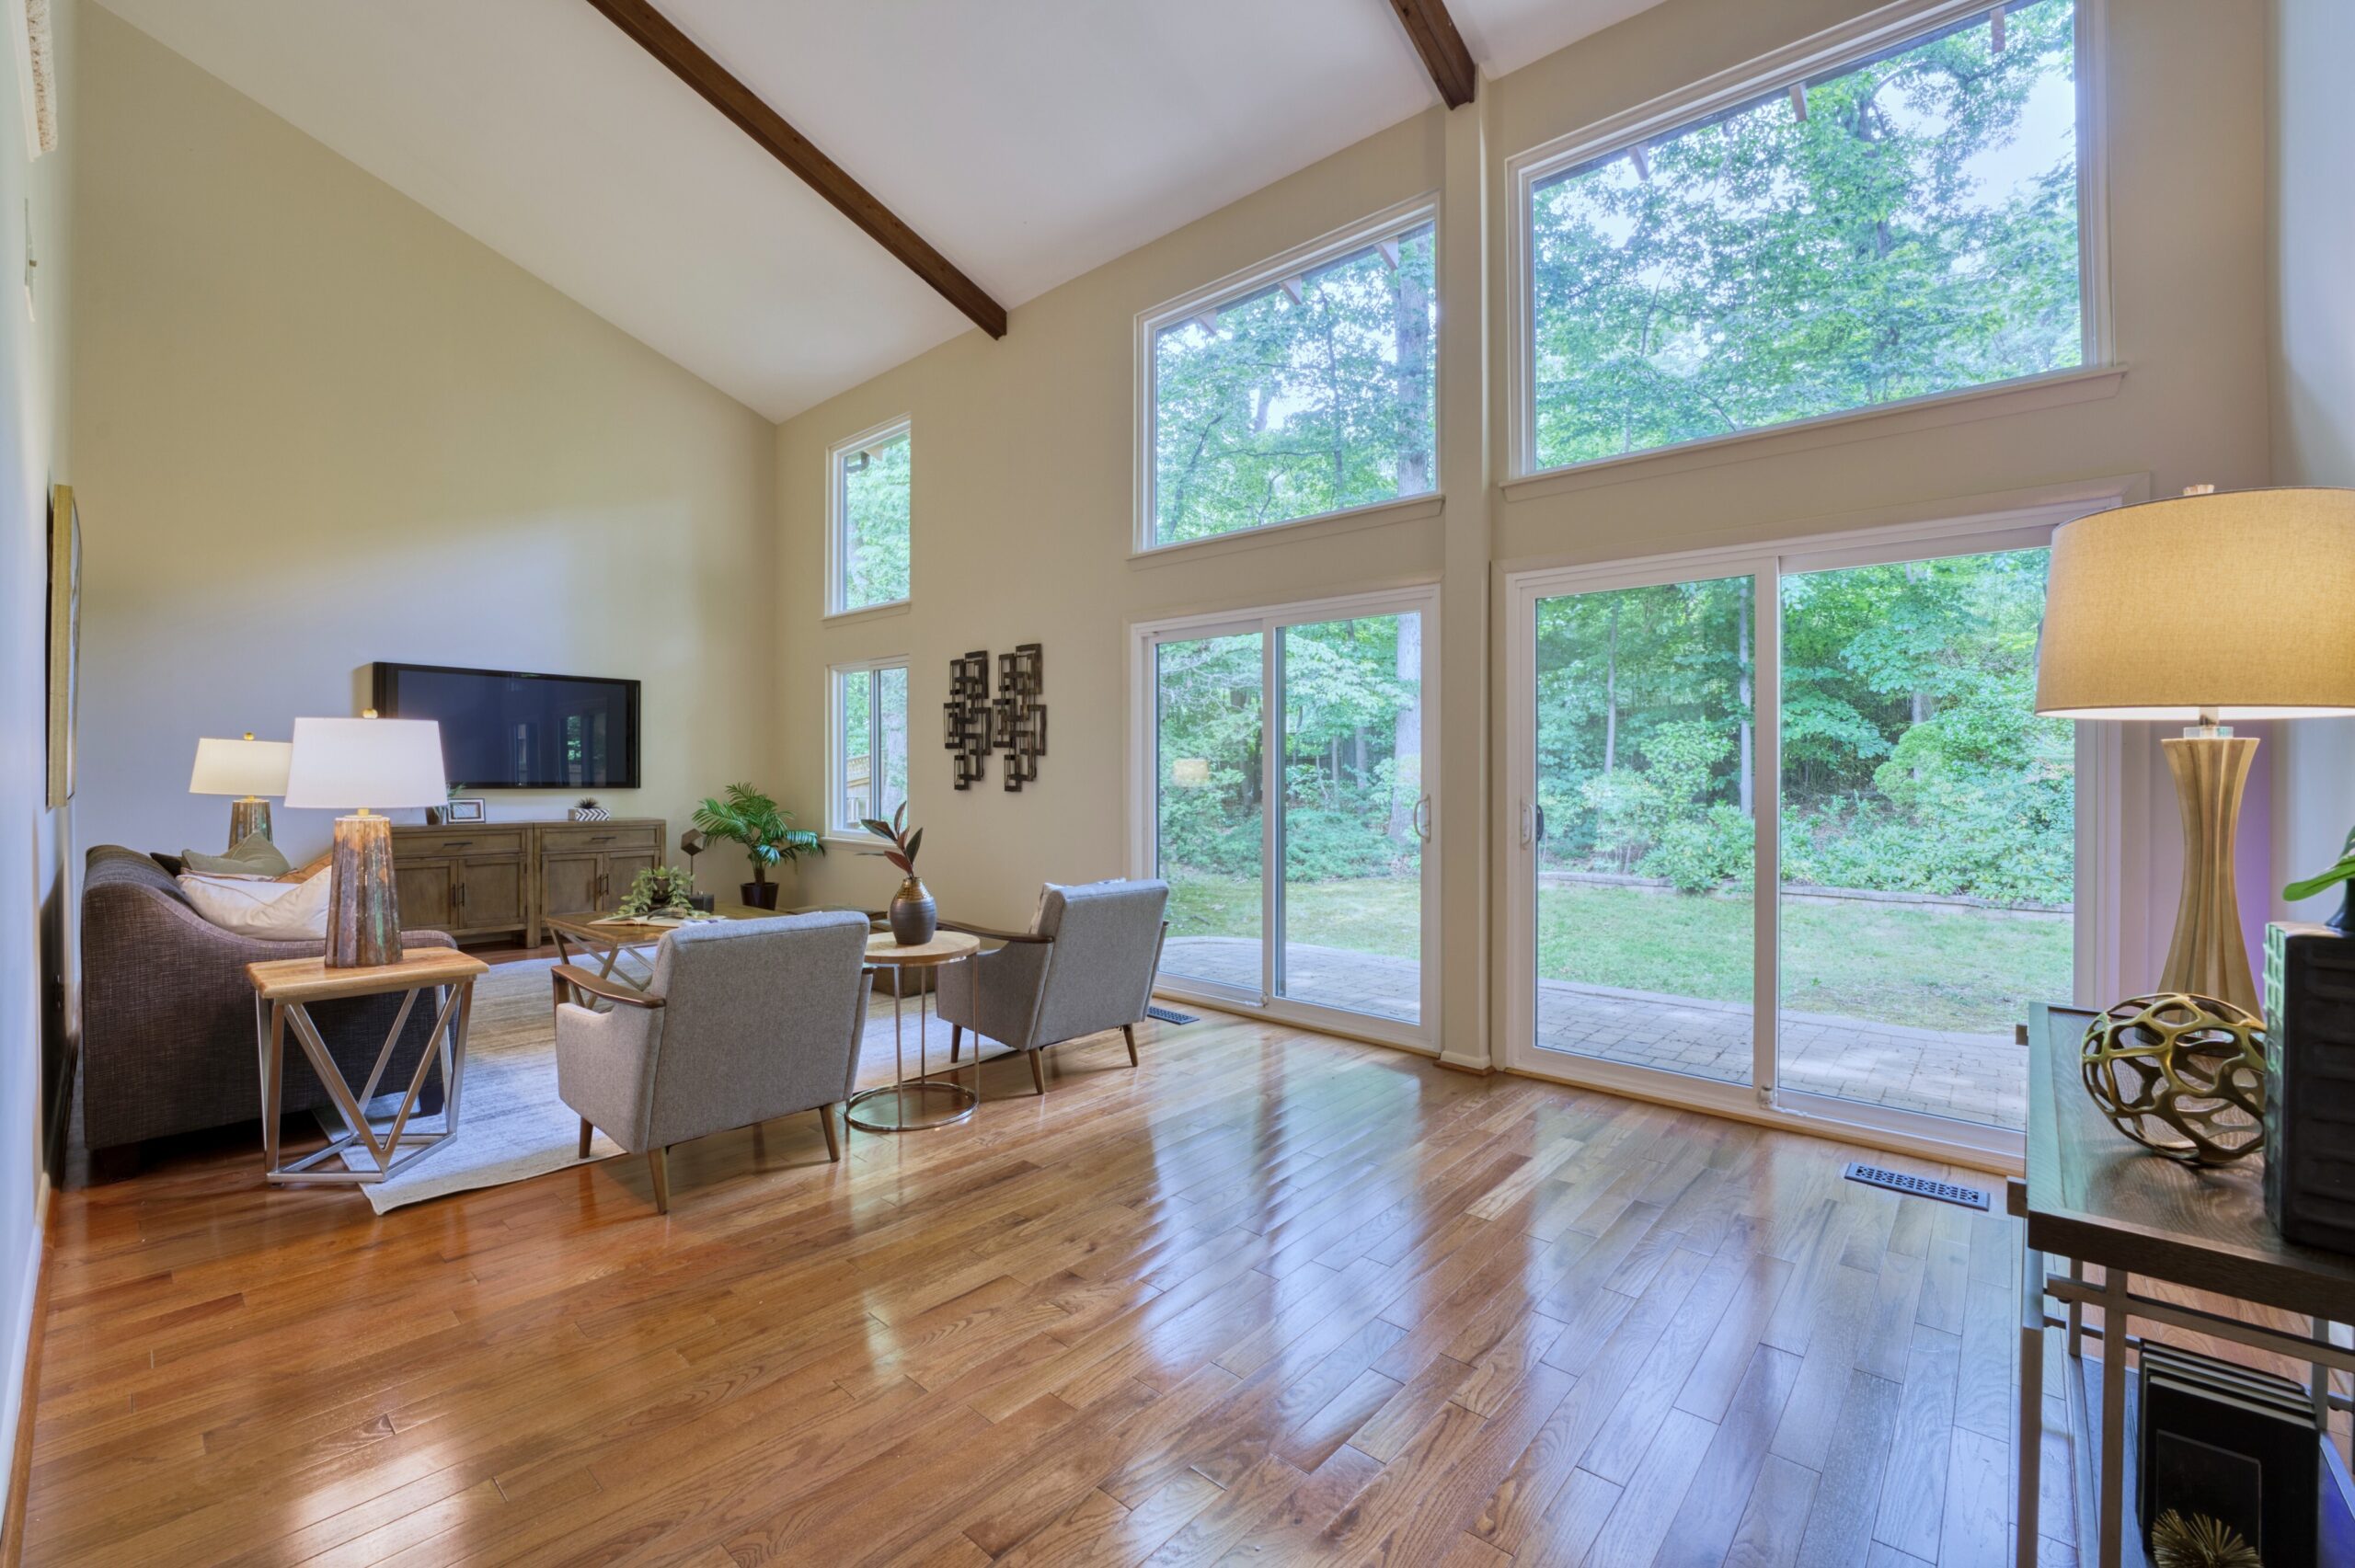 Professional interior photo of 5222 Bradfield Dr in Burke, Virginia - showing the main living room with vaulted ceilings and hardwood floors, wood accents and a wall of windows